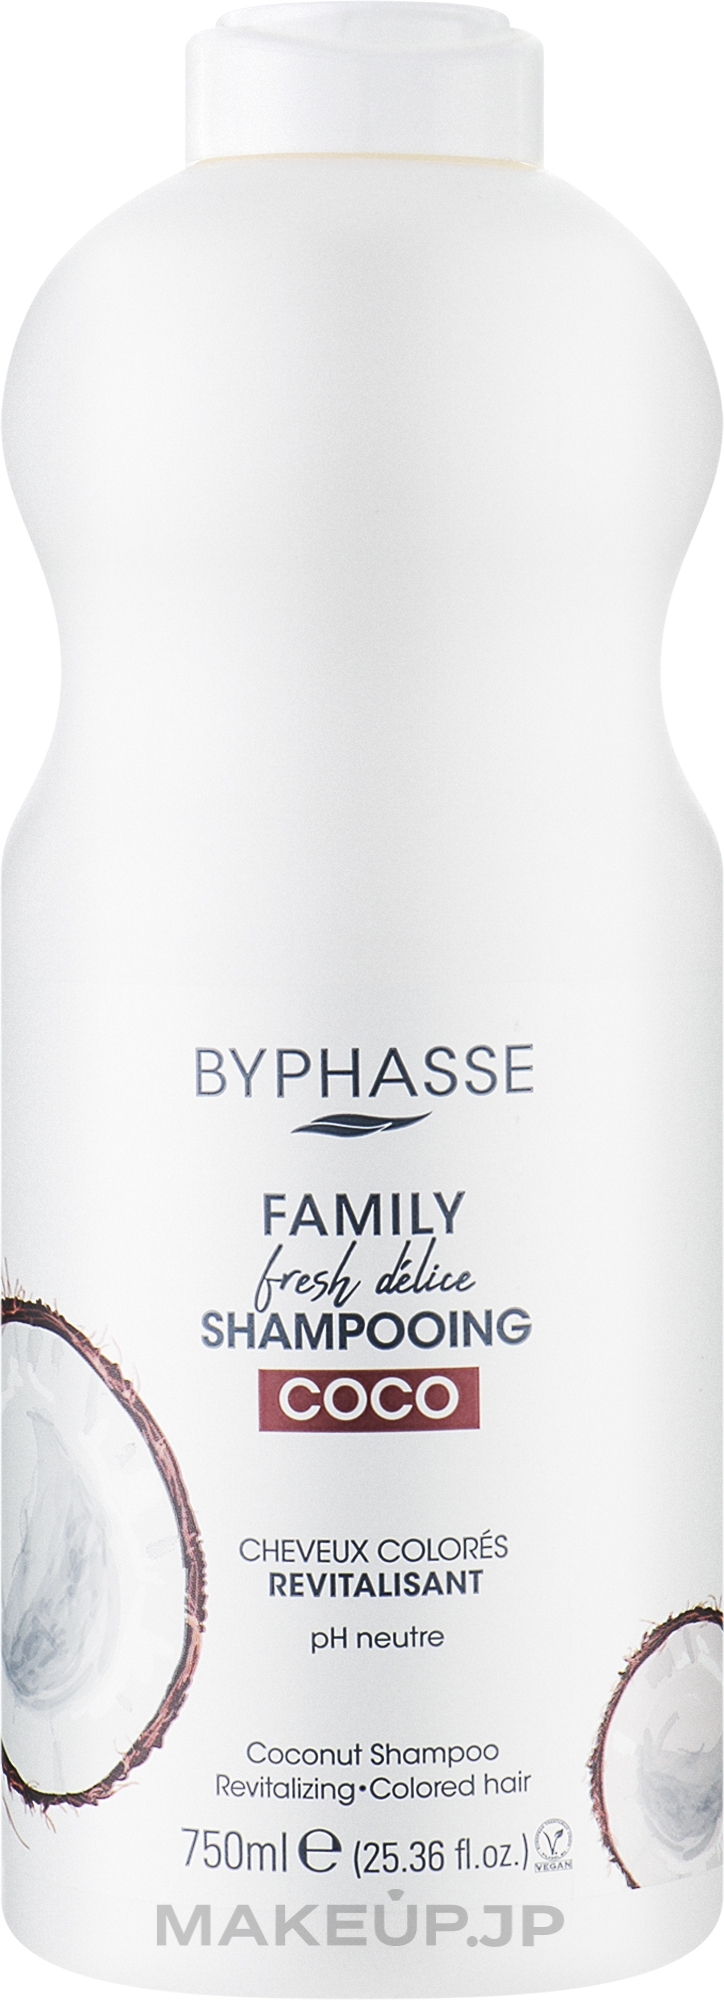 Coconut Shampoo for Colored Hair - Byphasse Family Fresh Delice Shampoo — photo 750 ml